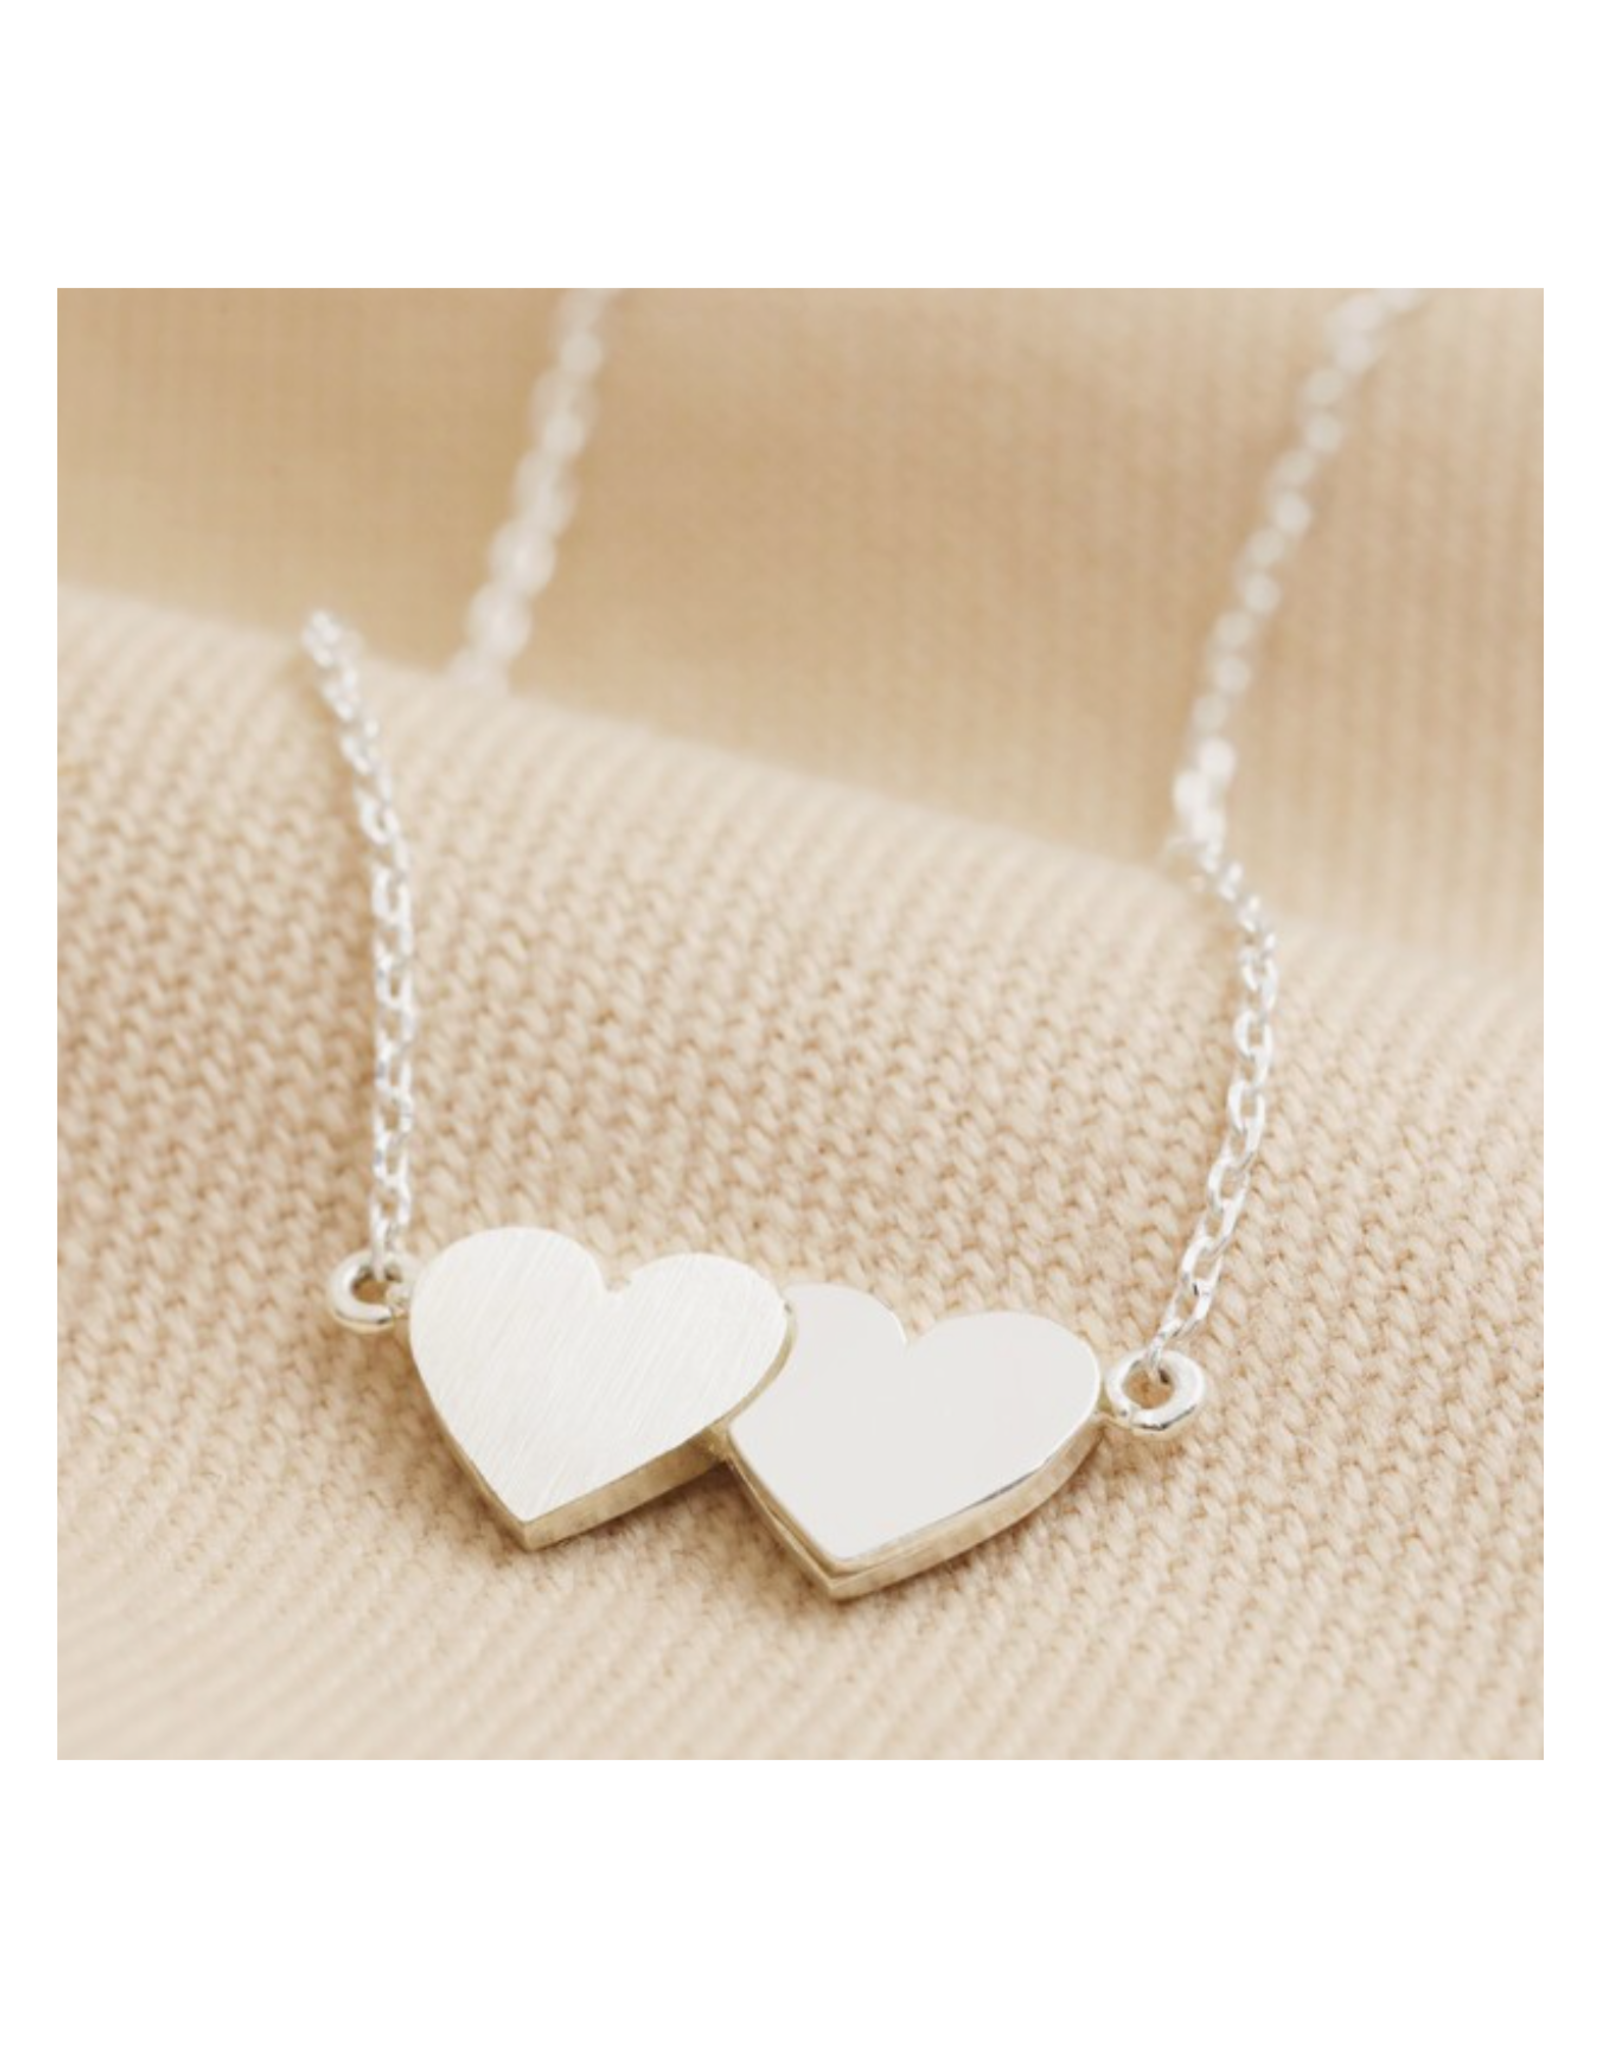 Linked Sterling Silver Hearts Necklace